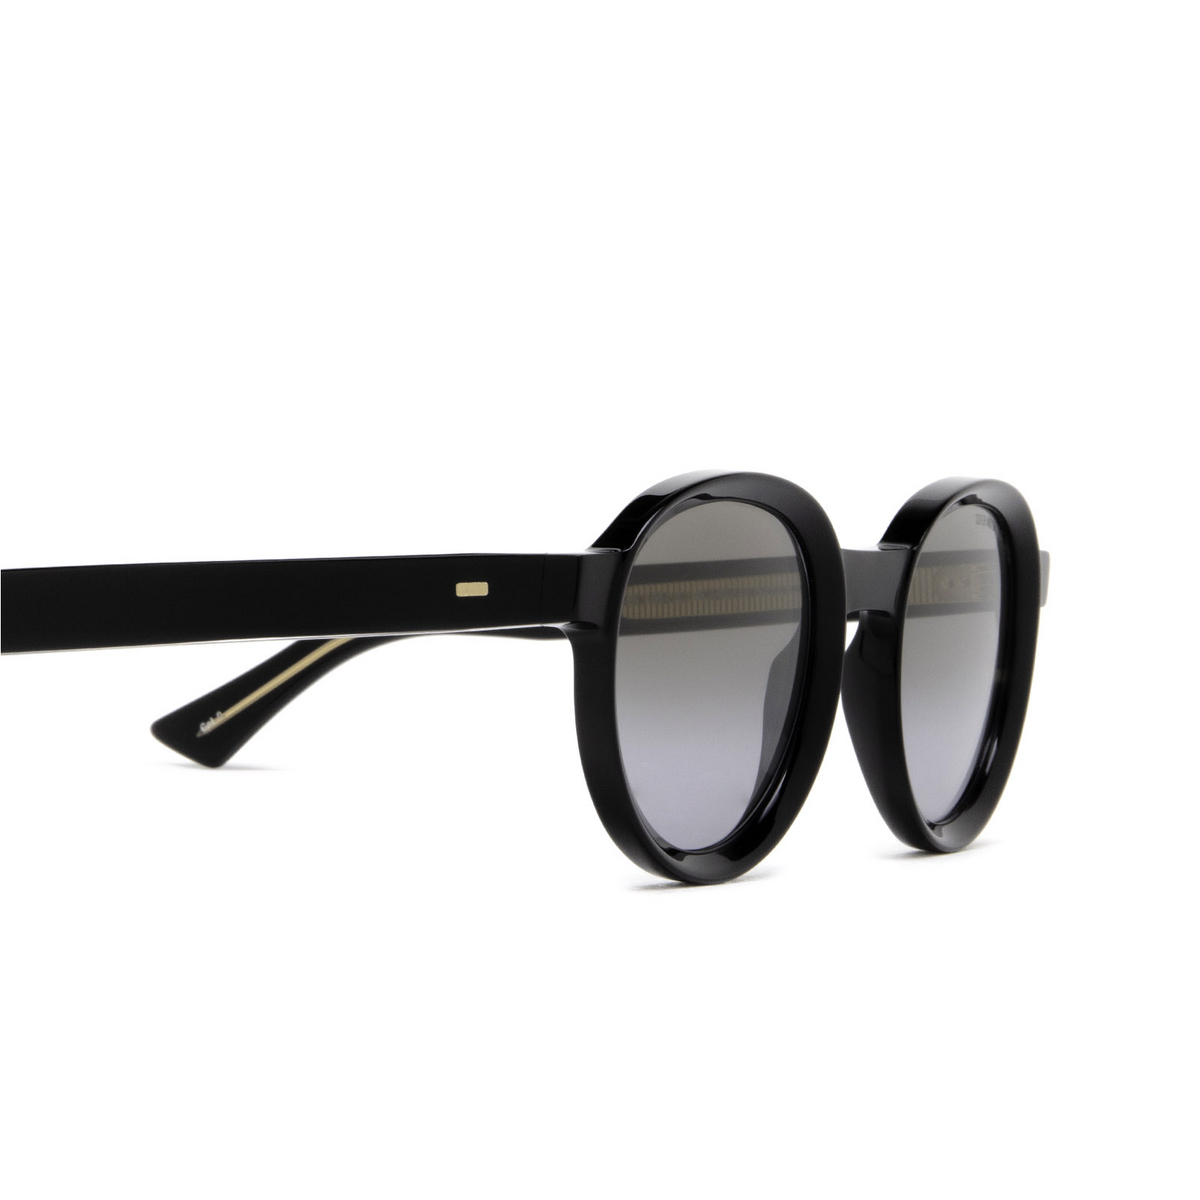 Cutler and Gross® Round Sunglasses: 1384 SUN color Black 01 - three-quarters view.